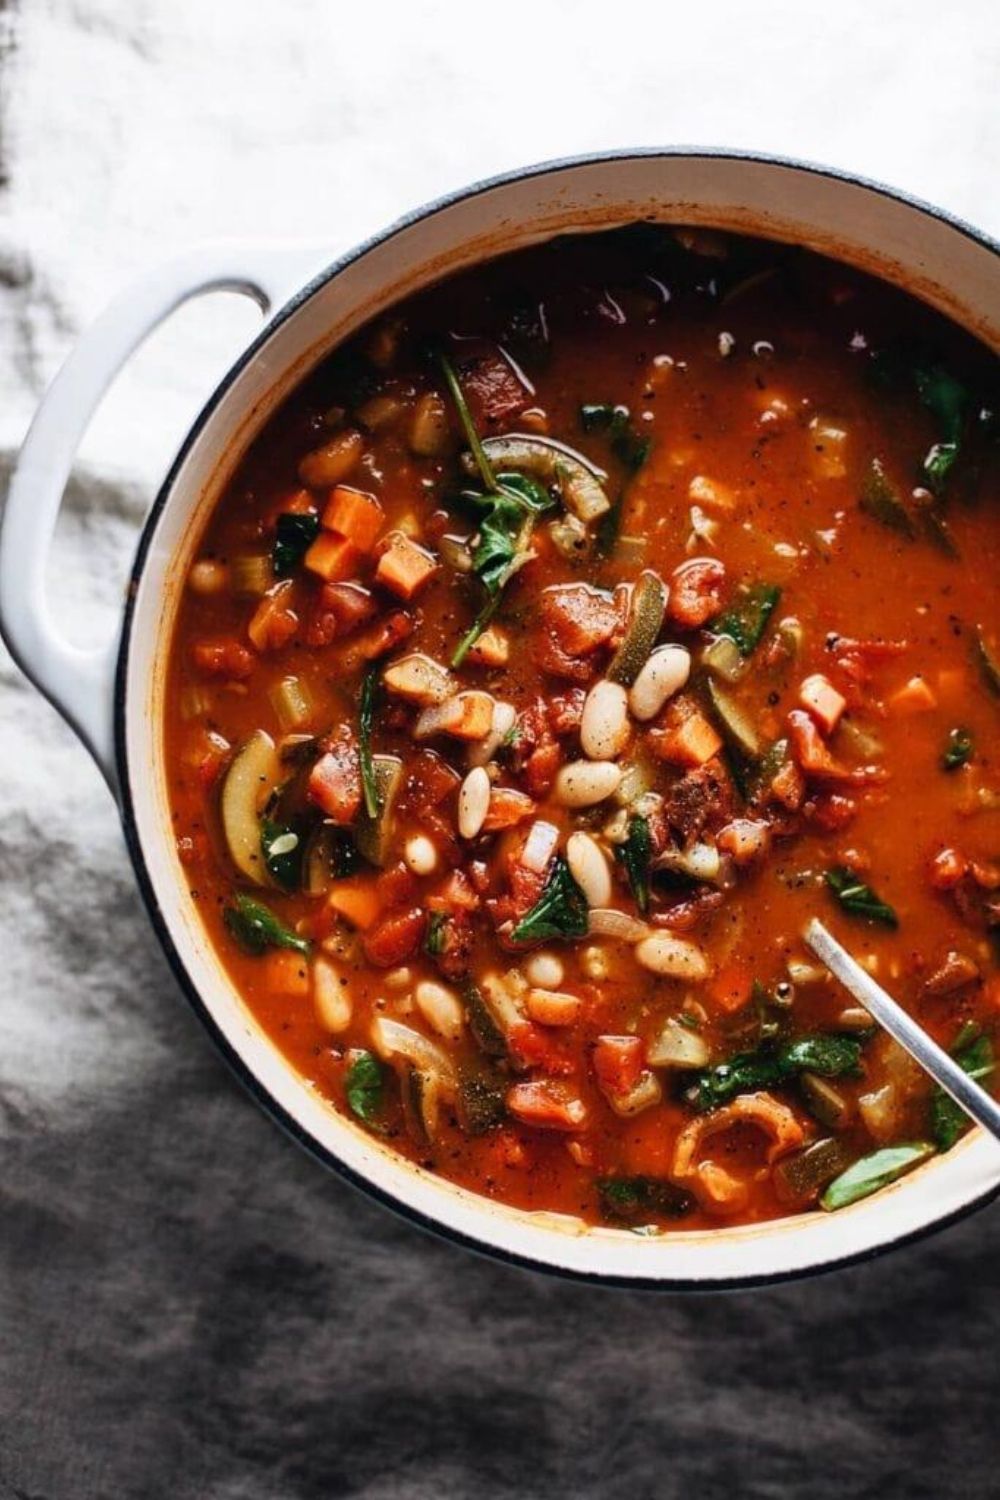 Tuscan White Bean Soup from A Simple Palate.